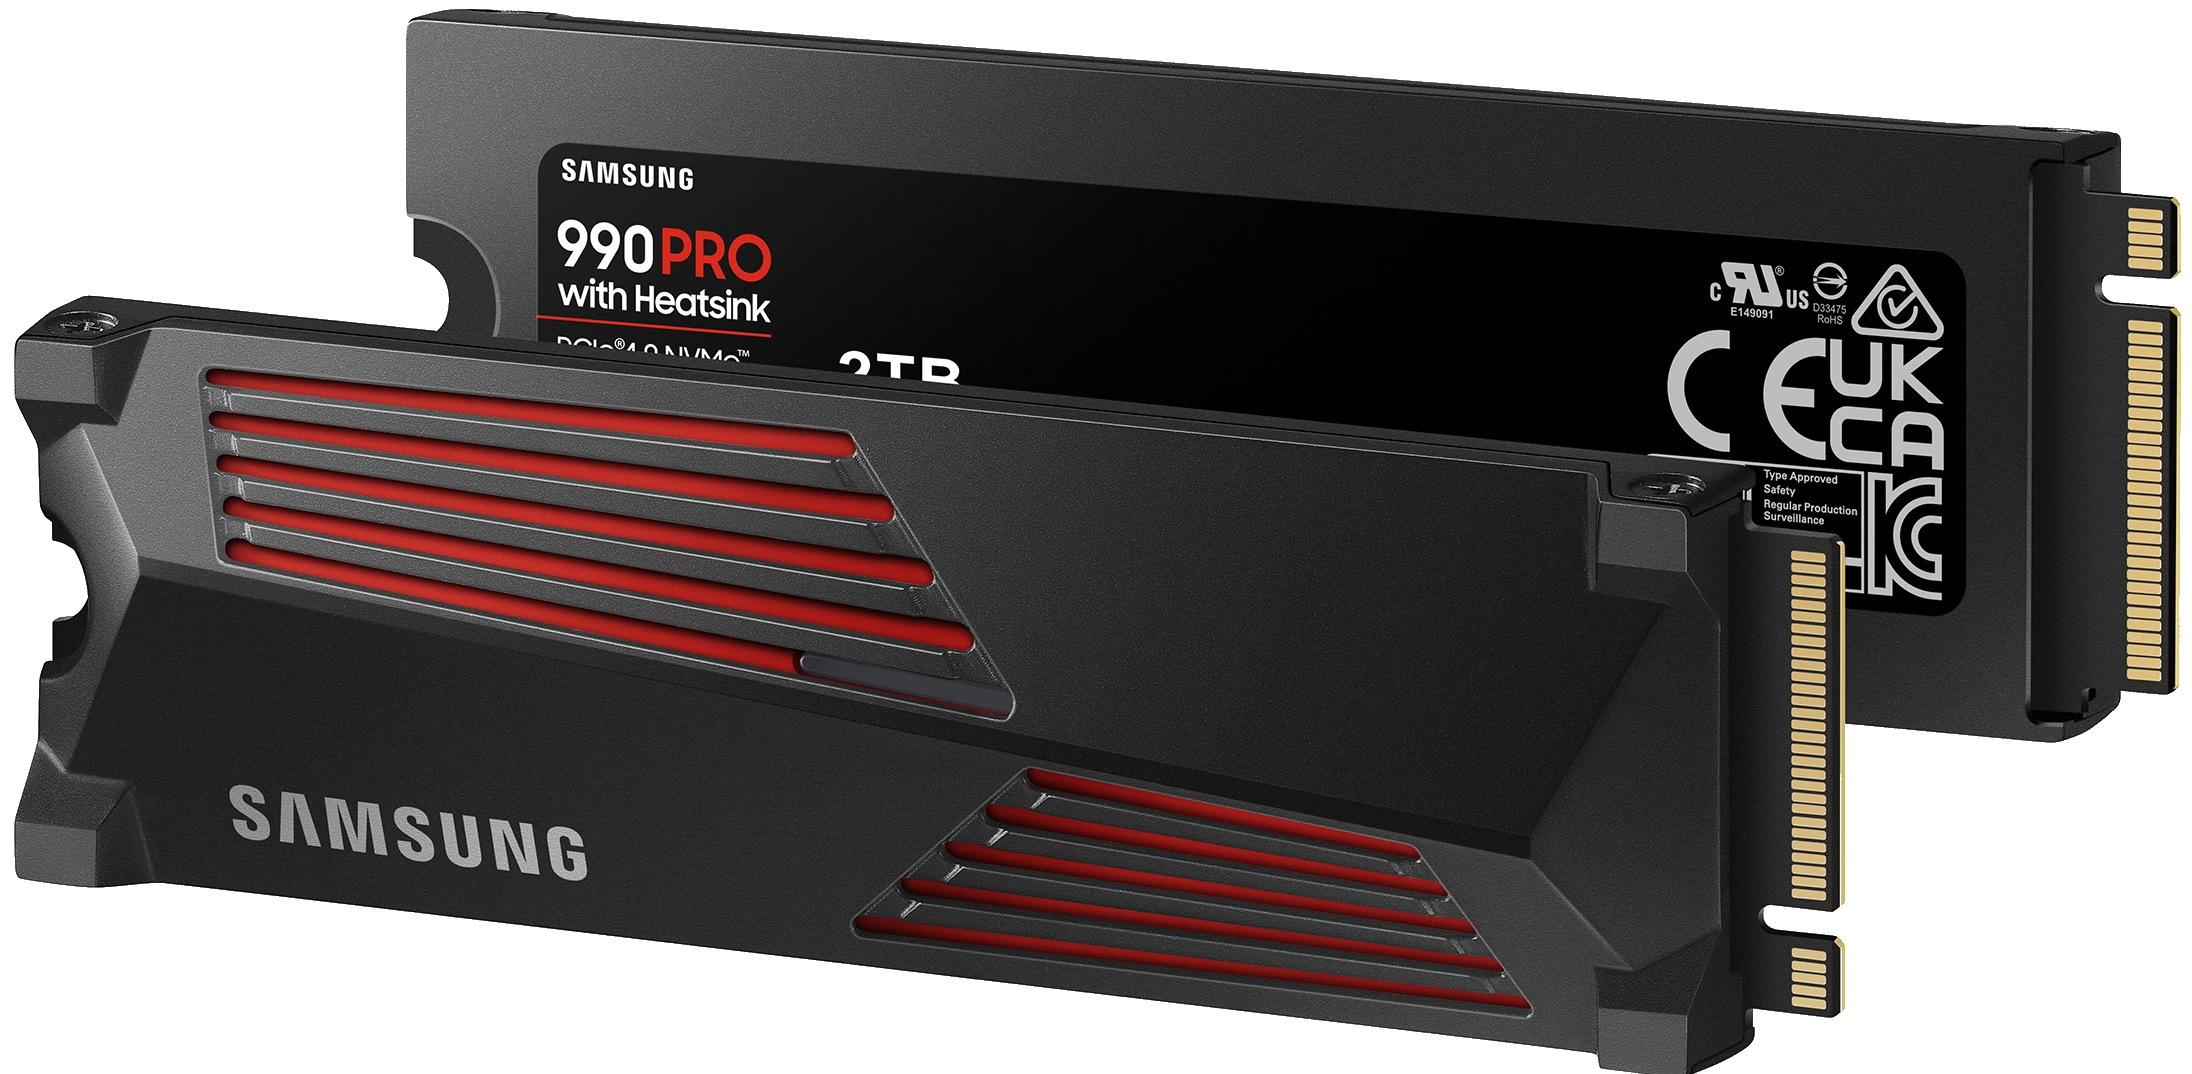 Samsung 990 Pro SSD Officially Revealed – Hardware Confirmed – NAS Compares